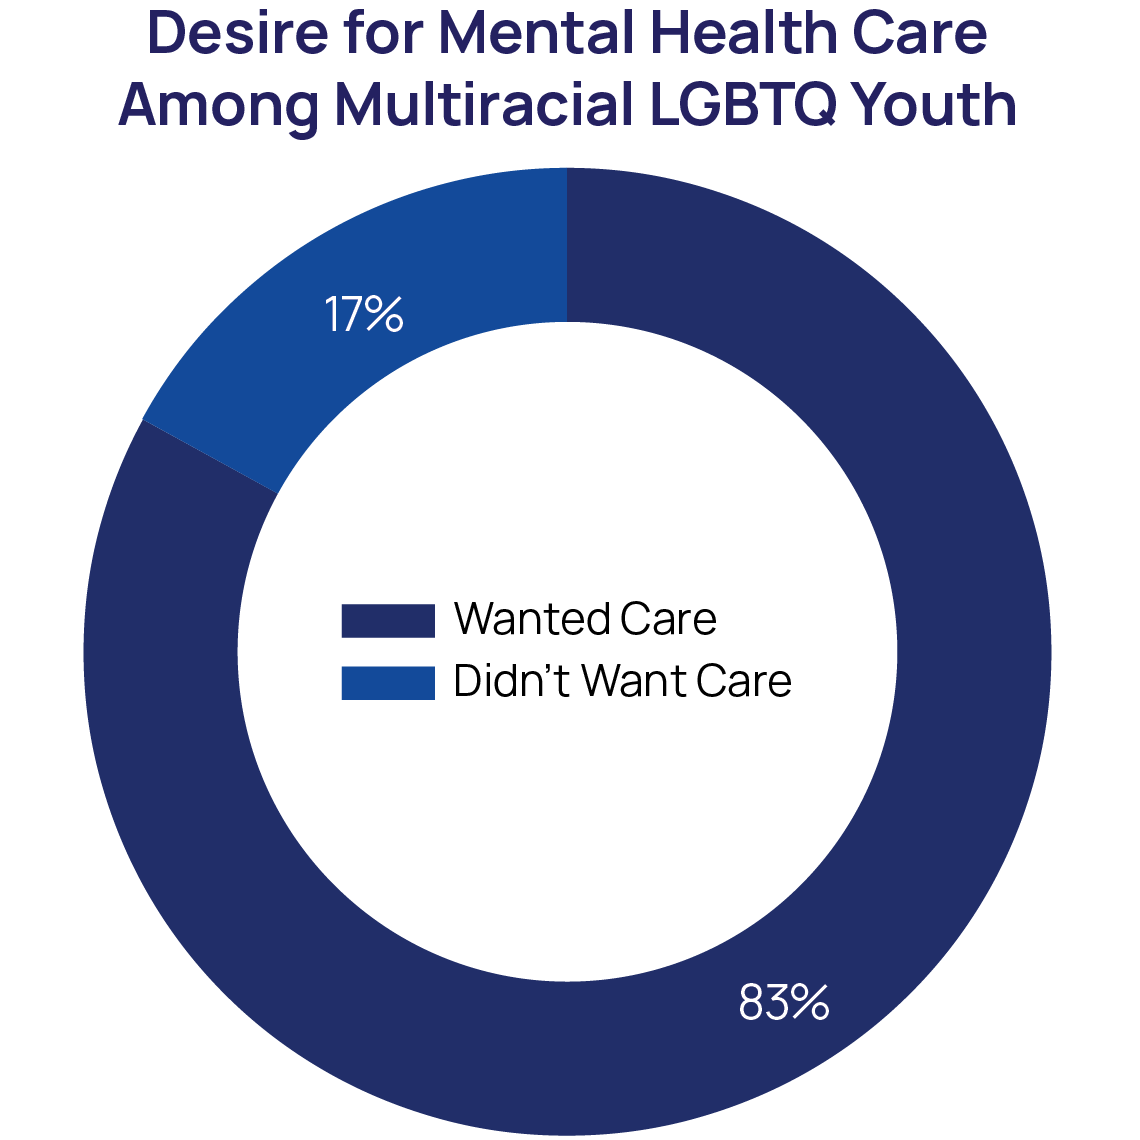 Desire for Mental Health Care among Multiracial LGBTQ Youth